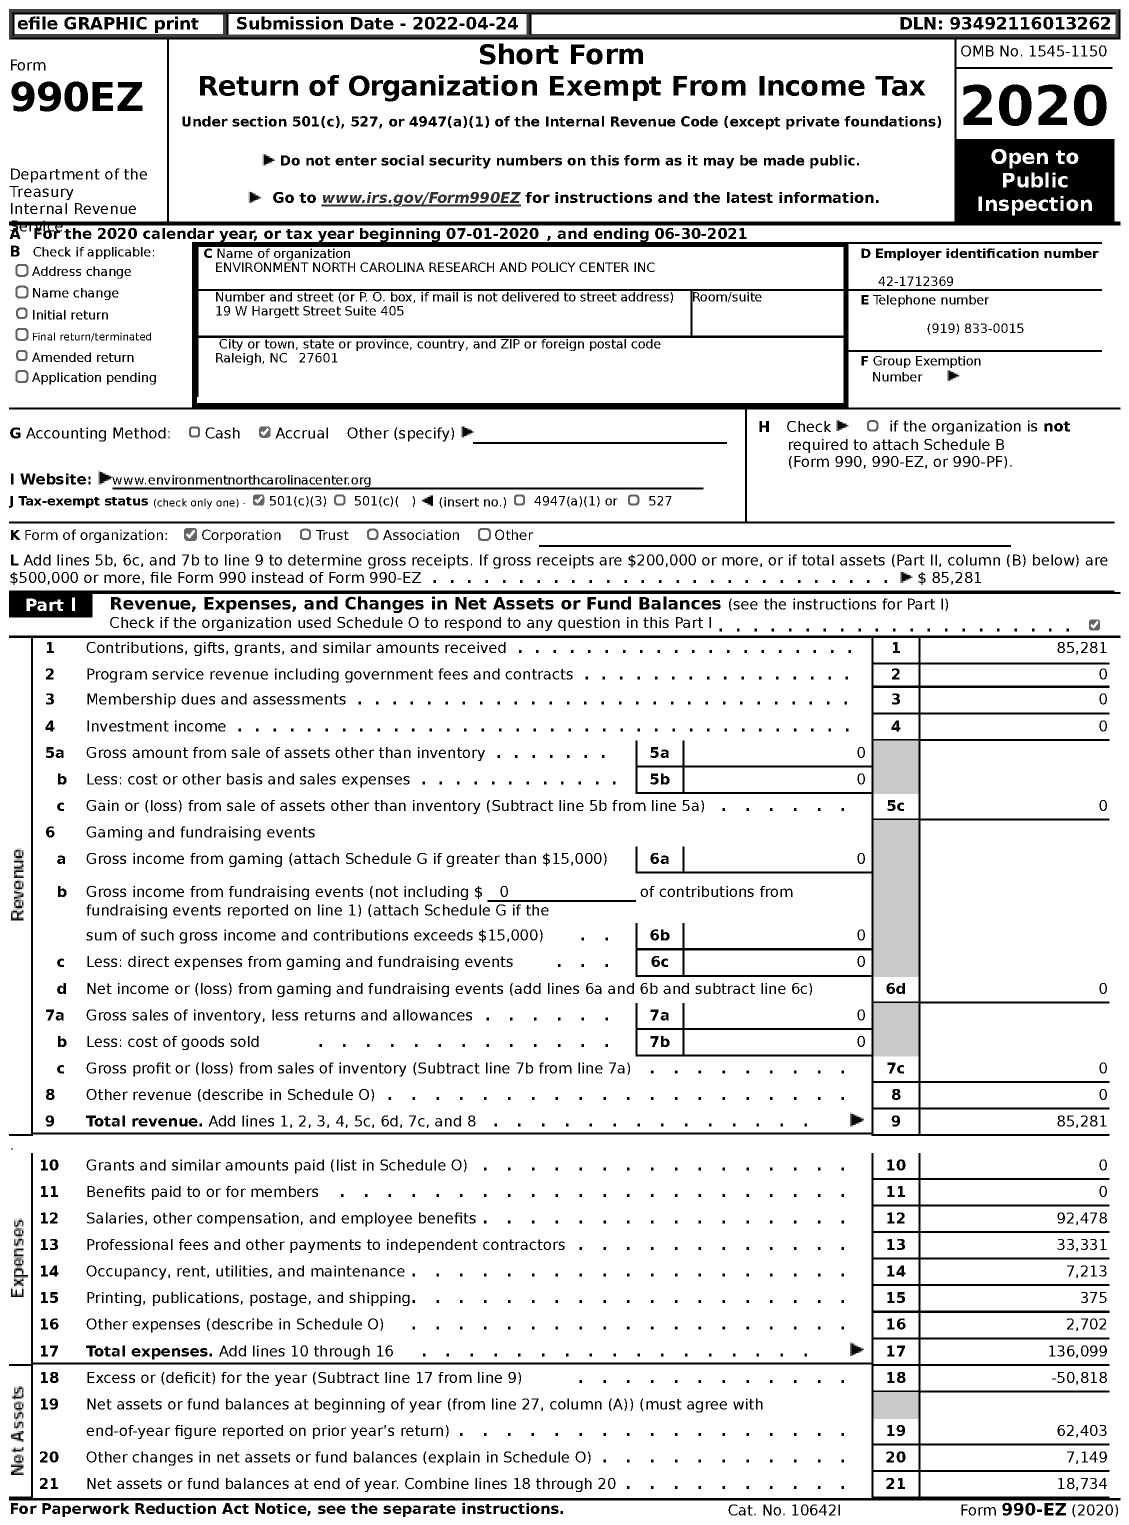 Image of first page of 2020 Form 990EZ for Environment North Carolina Research and Policy Center